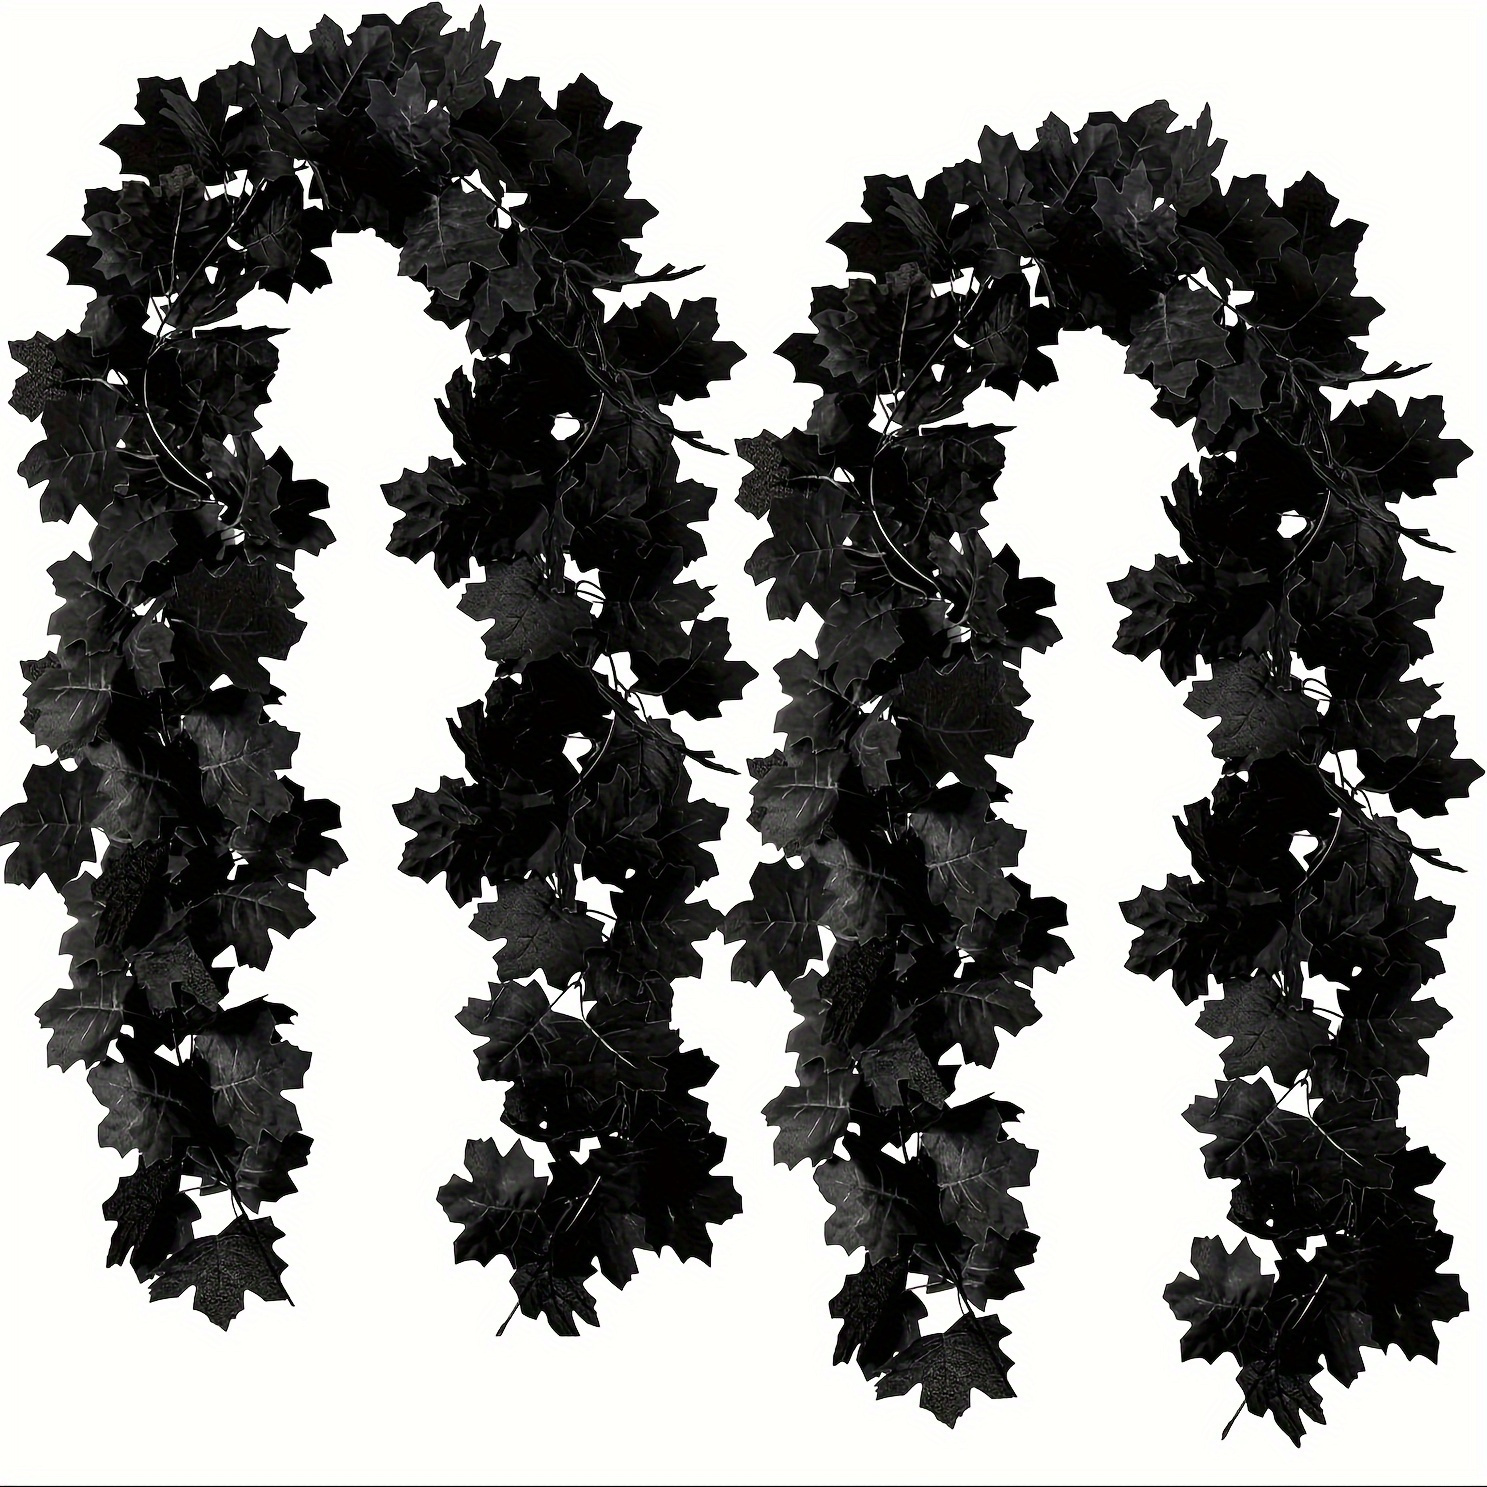 

2-pack Artificial Black Maple Leaf Garland - 68.89" Plastic Vine Decoration For Halloween, No Power Needed - Versatile Faux Fall Leaves For Home Decor, Weddings, And Thanksgiving Displays